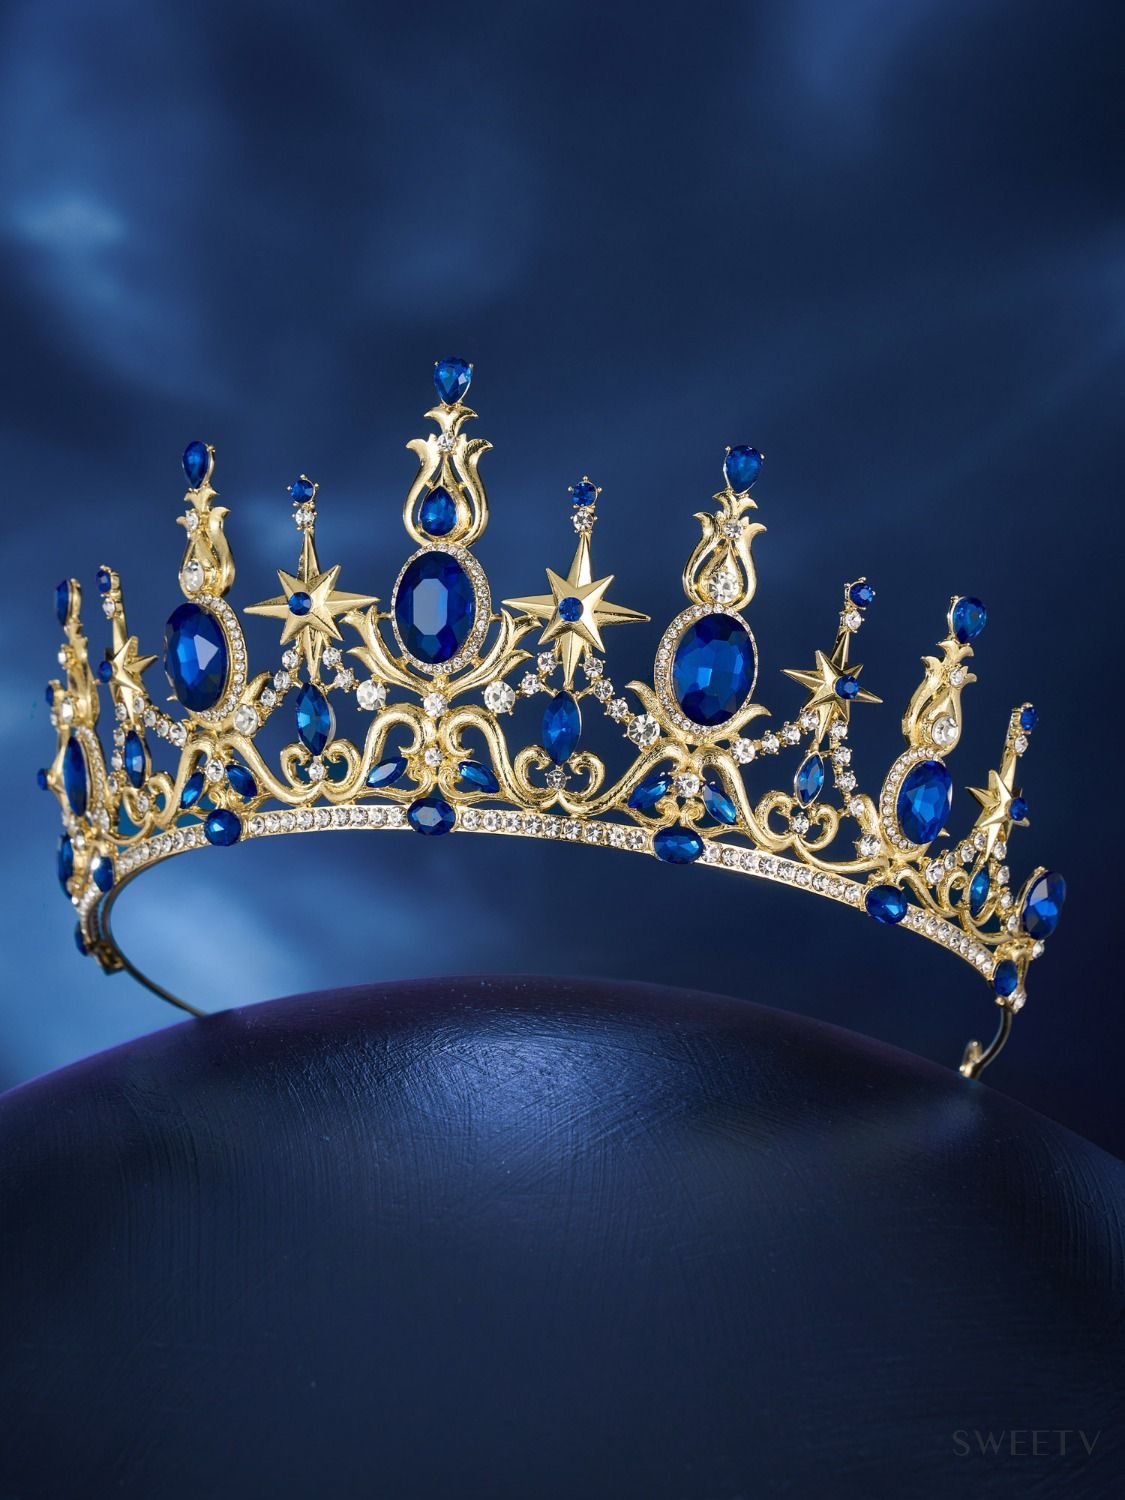 Shining Star Queen Crown $21.99 New Arrival- SWEETV